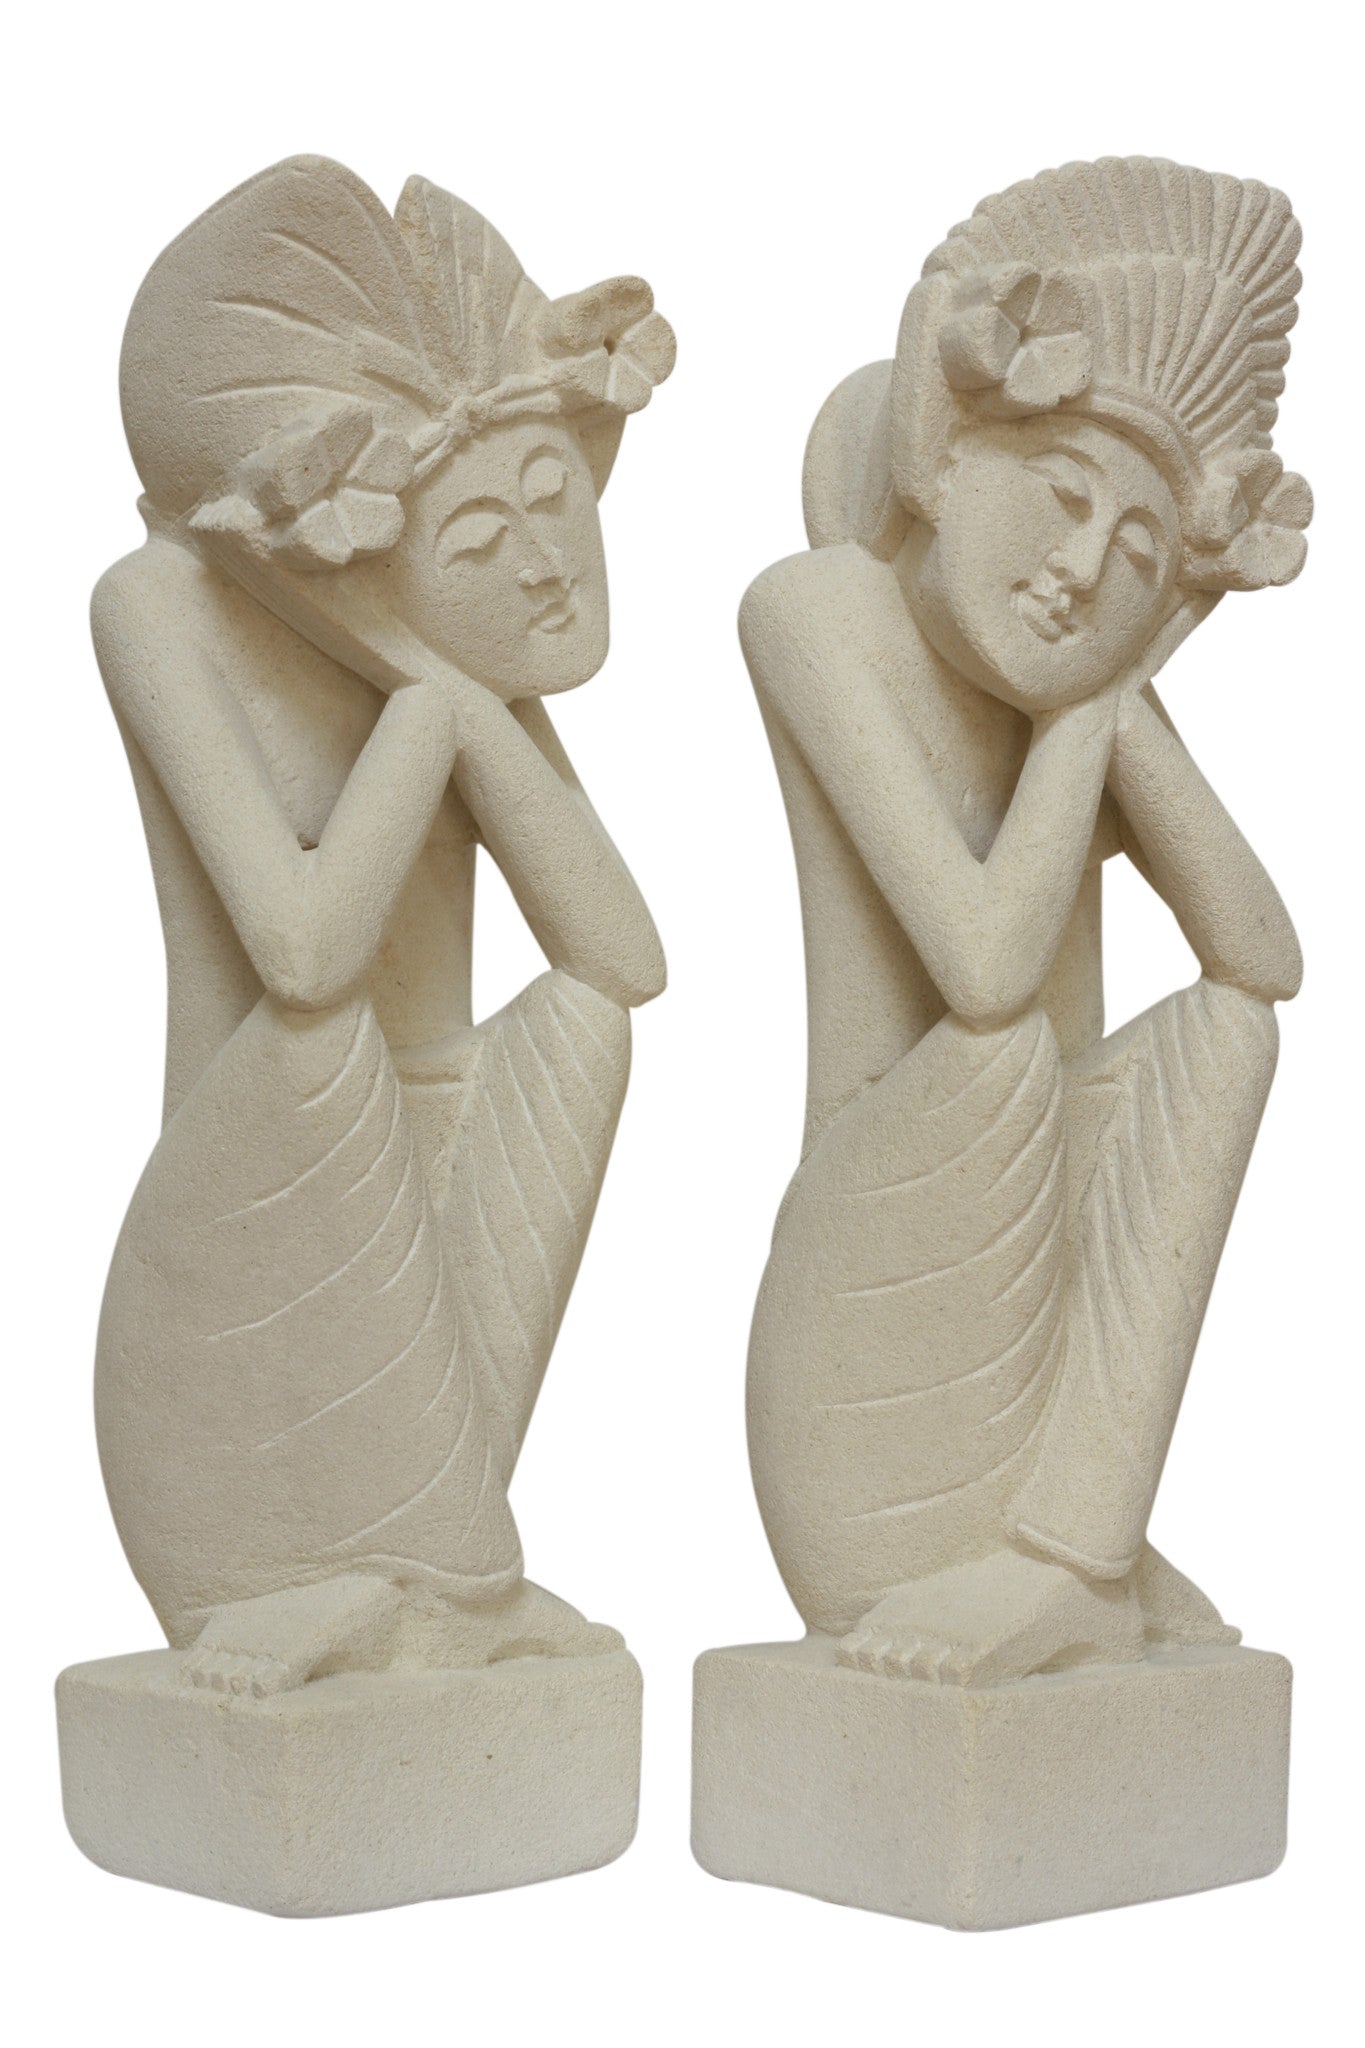 Hand Carved Limestone Sculpture Set of 2, a Man and a Woman Dreaming Limestone Statue Home Decor Handmade Handcrafted Gift Art Figurine Accent Stone